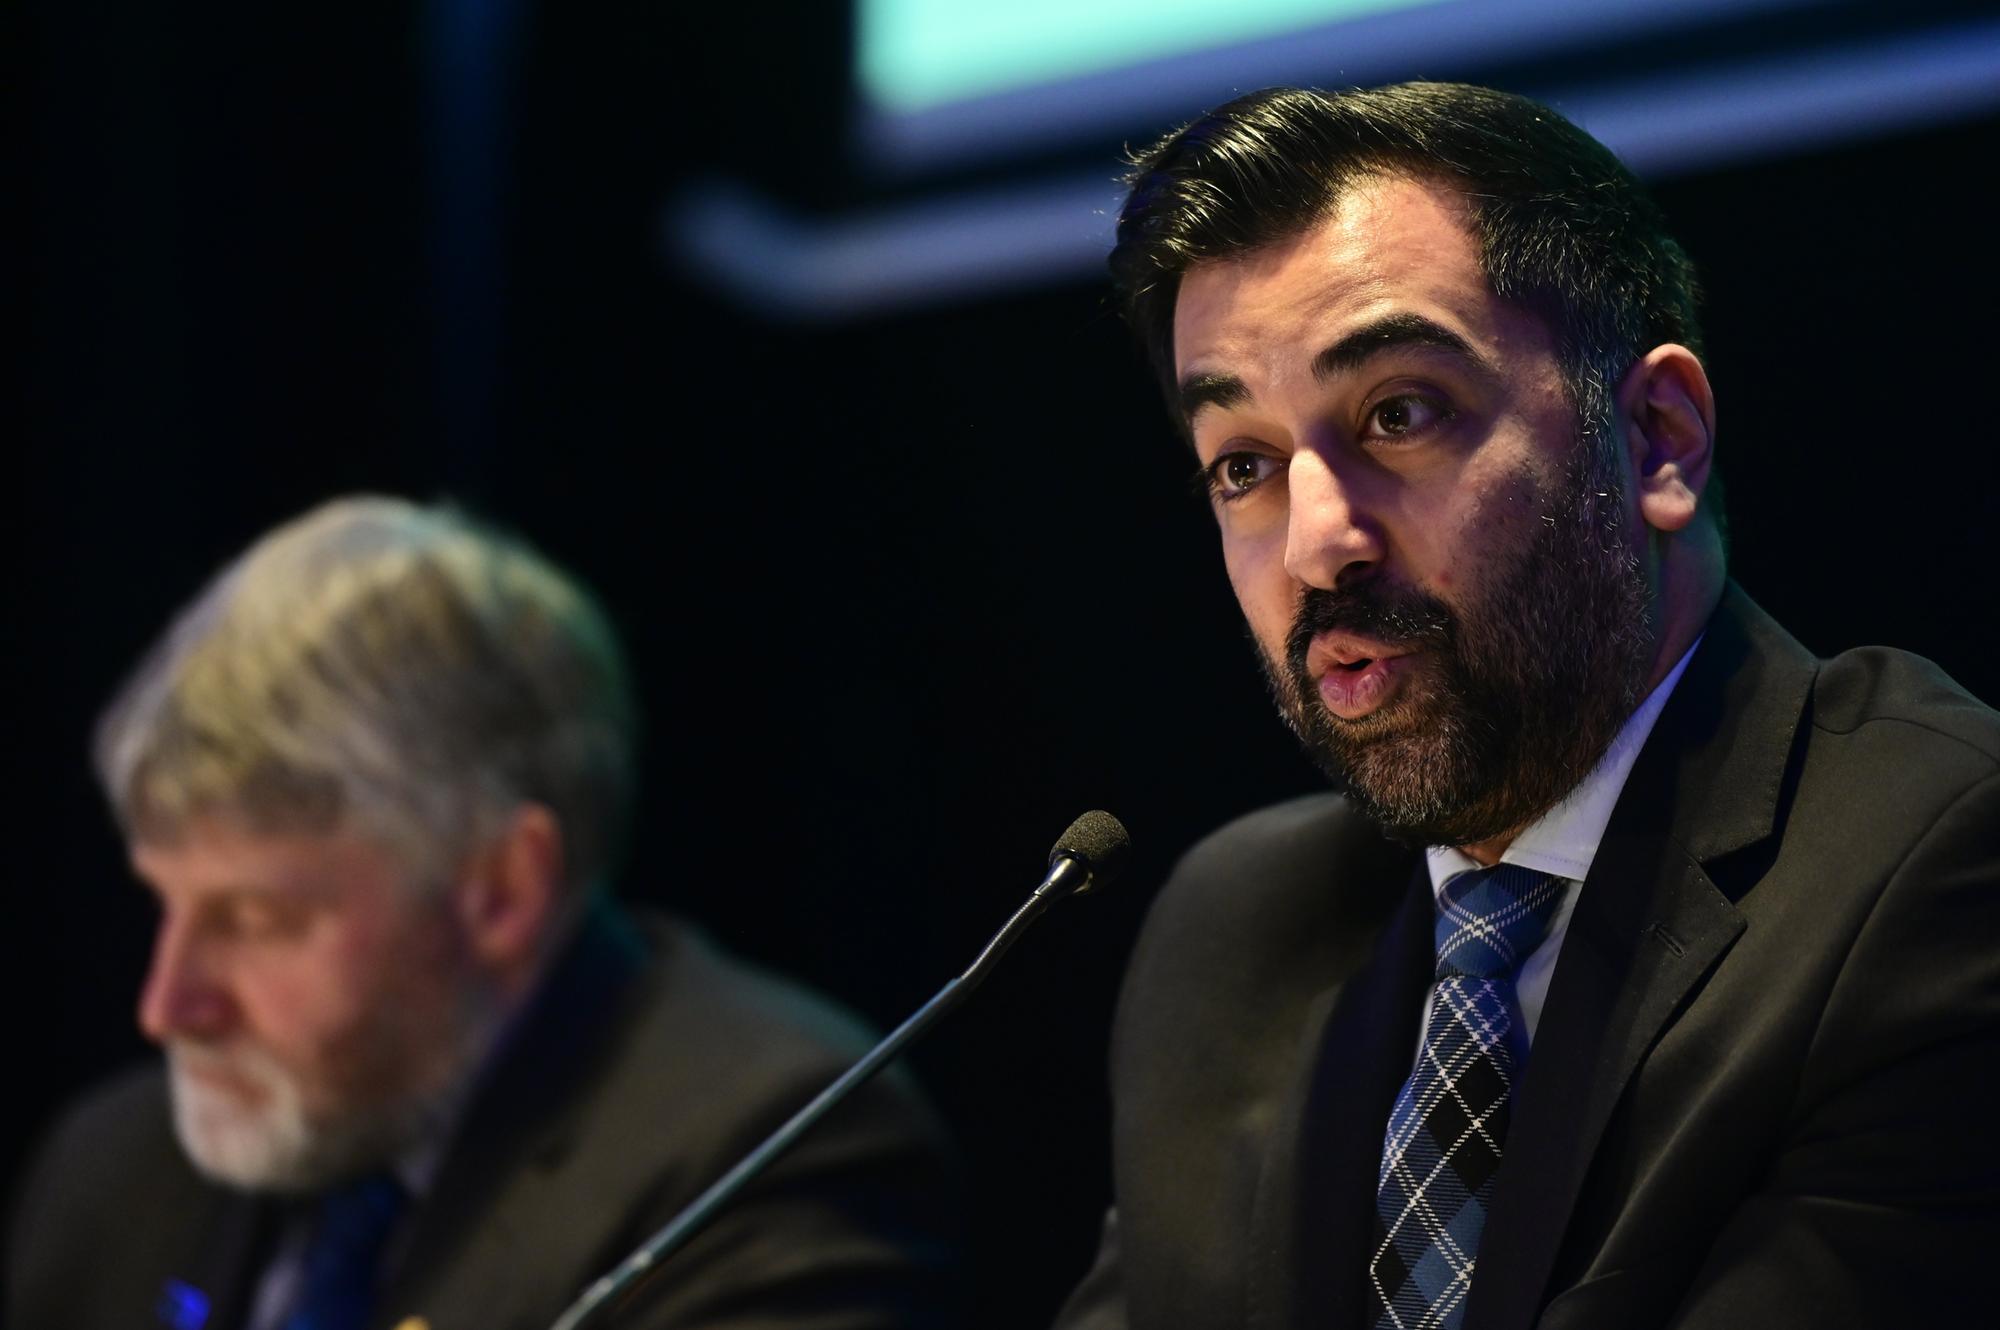 euan mccolm: almost a year on, the fall of the house of humza yousaf has started